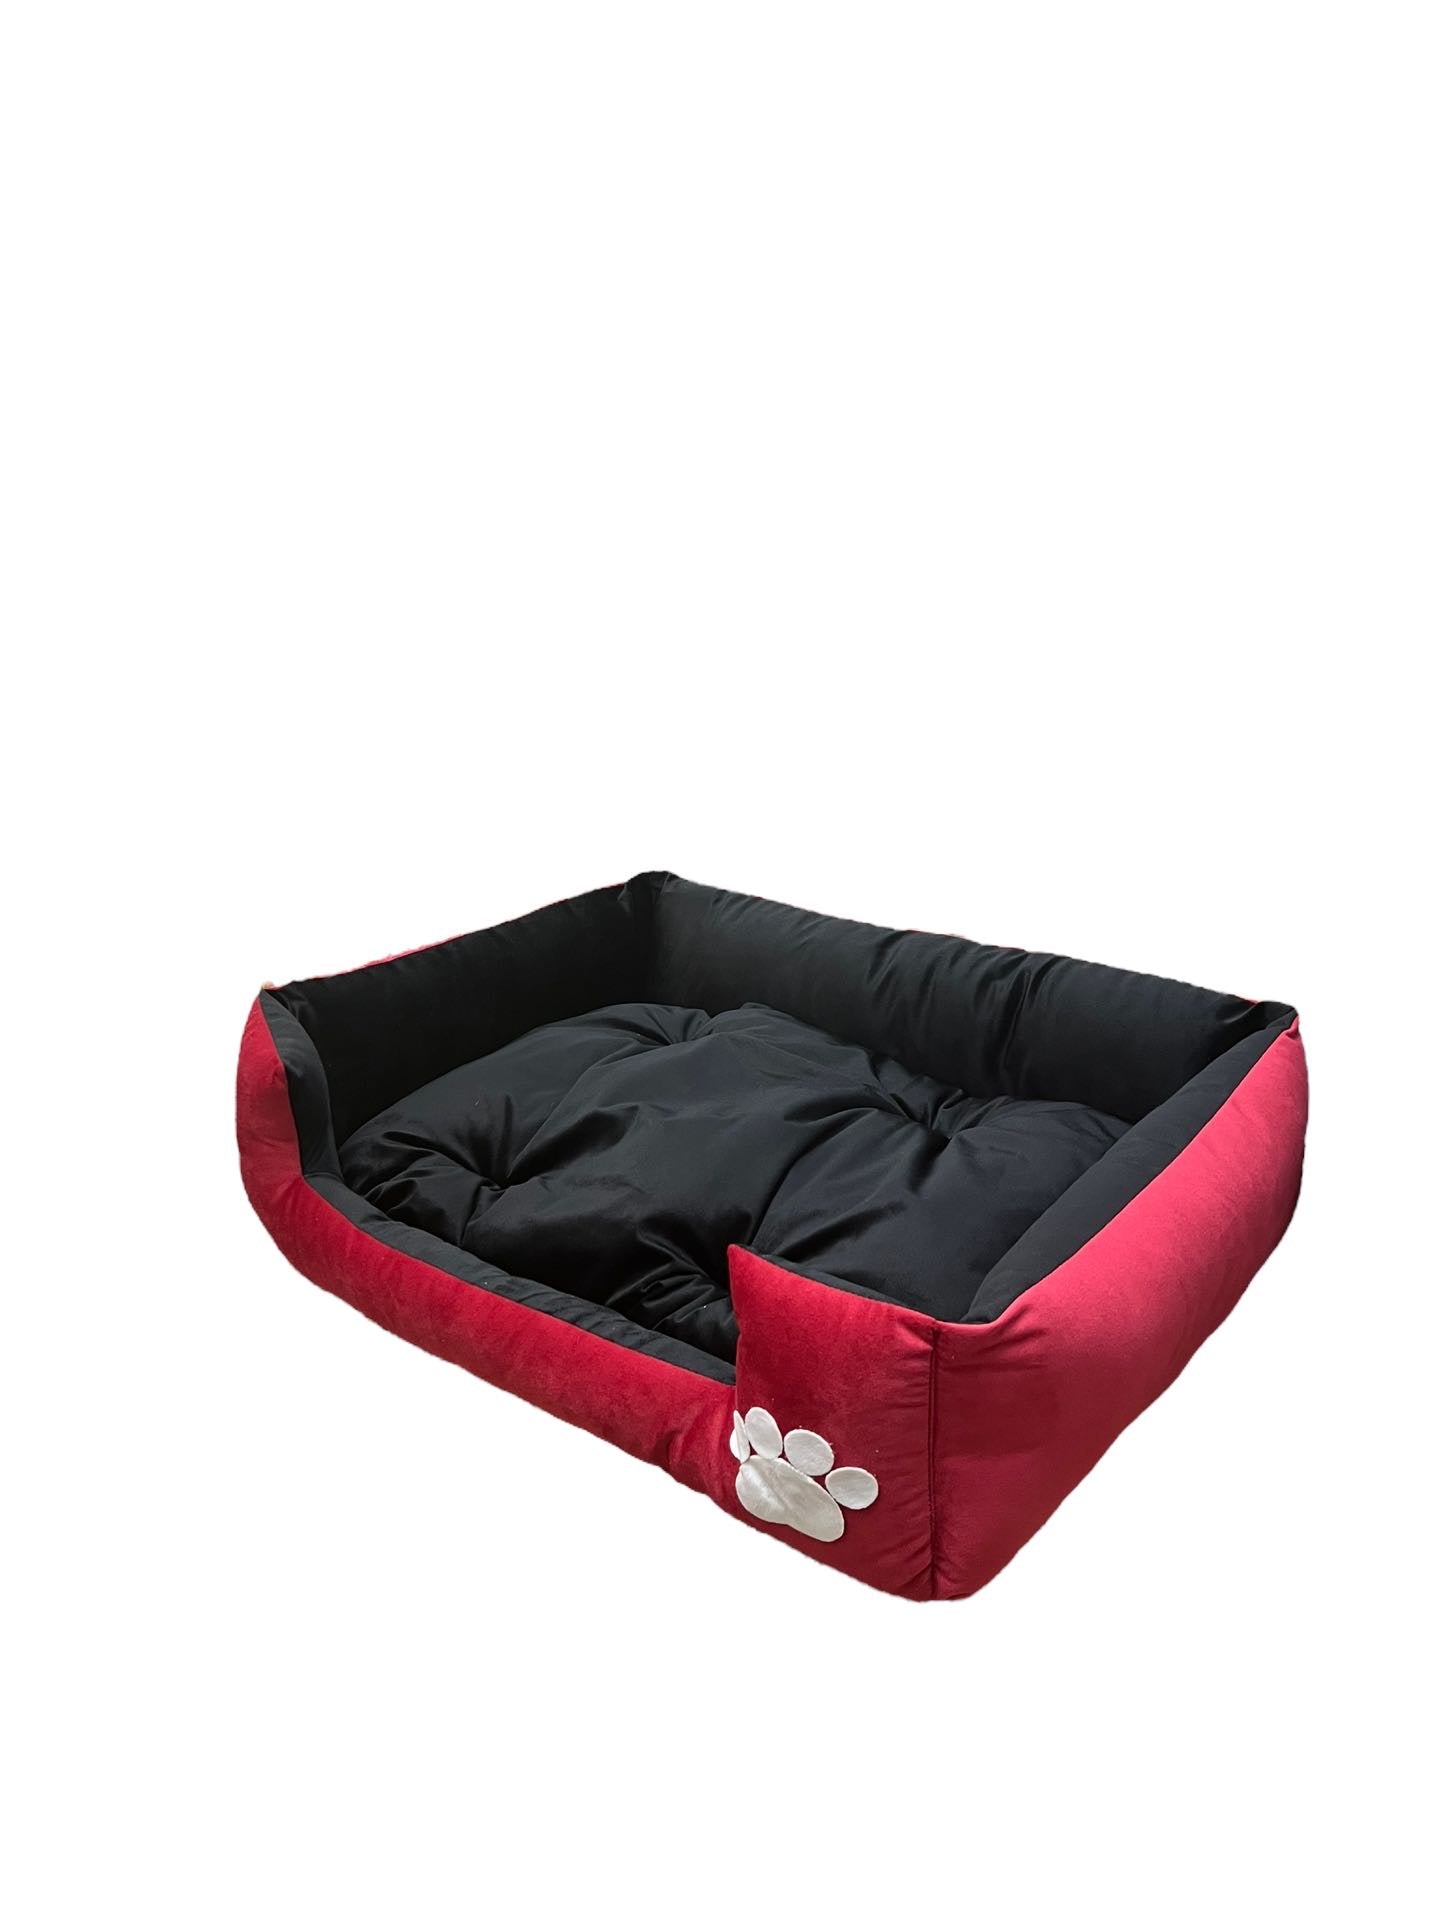 Comfy paw pet bed - XL - For cats & Small breed dogs | Red and Black